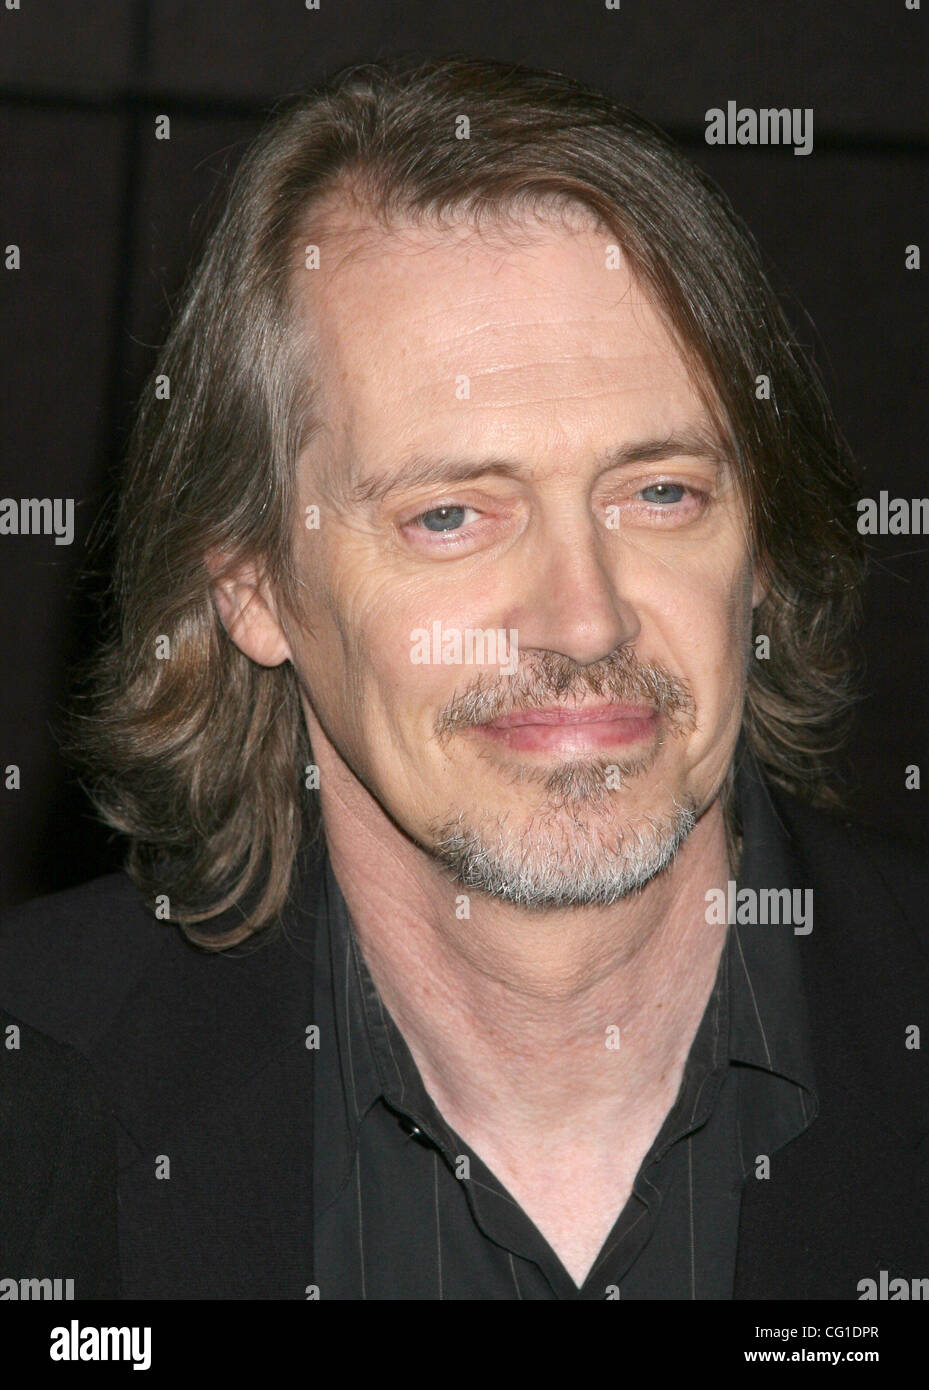 Aug 09, 2007 - New York, NY, USA - STEVE BUSCEMI  attends the New York Special screening of 'Delirious, which took place at the Tribeca Grand Hotel.  (Credit Image: © Dan Herrick/KPA-ZUMA/ZUMA Press) Stock Photo